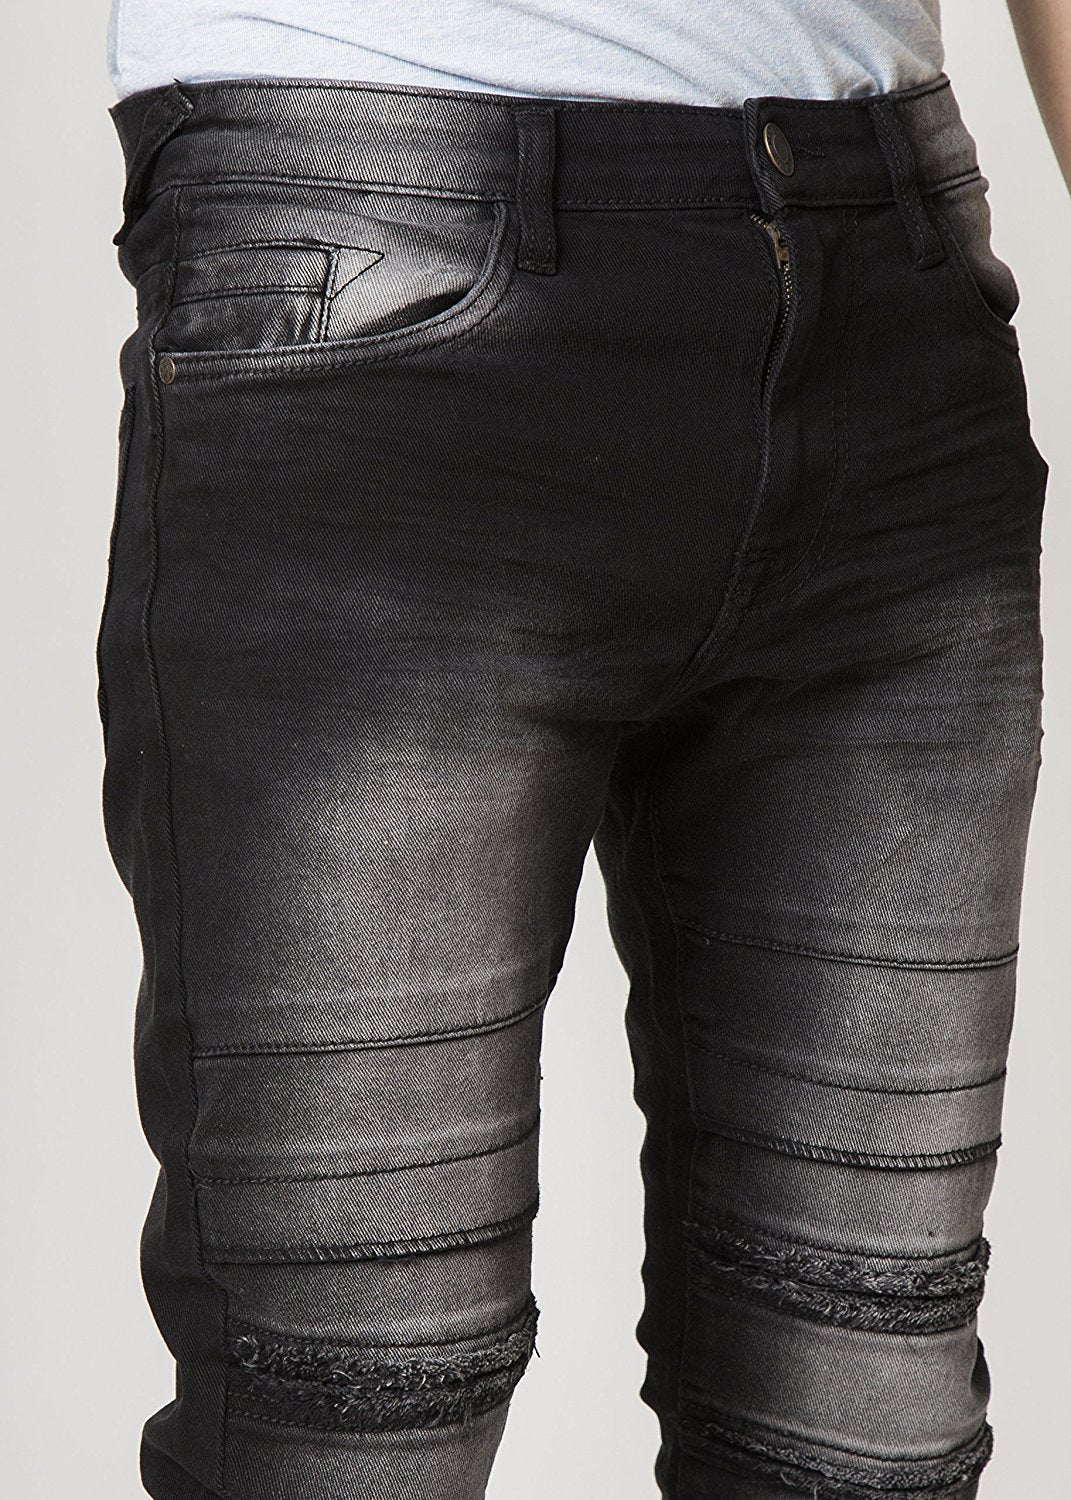 Mad Blue Men's Biker Slim Fit Tapered Leg Distressed Moto Style Jeans - Available in More Designs